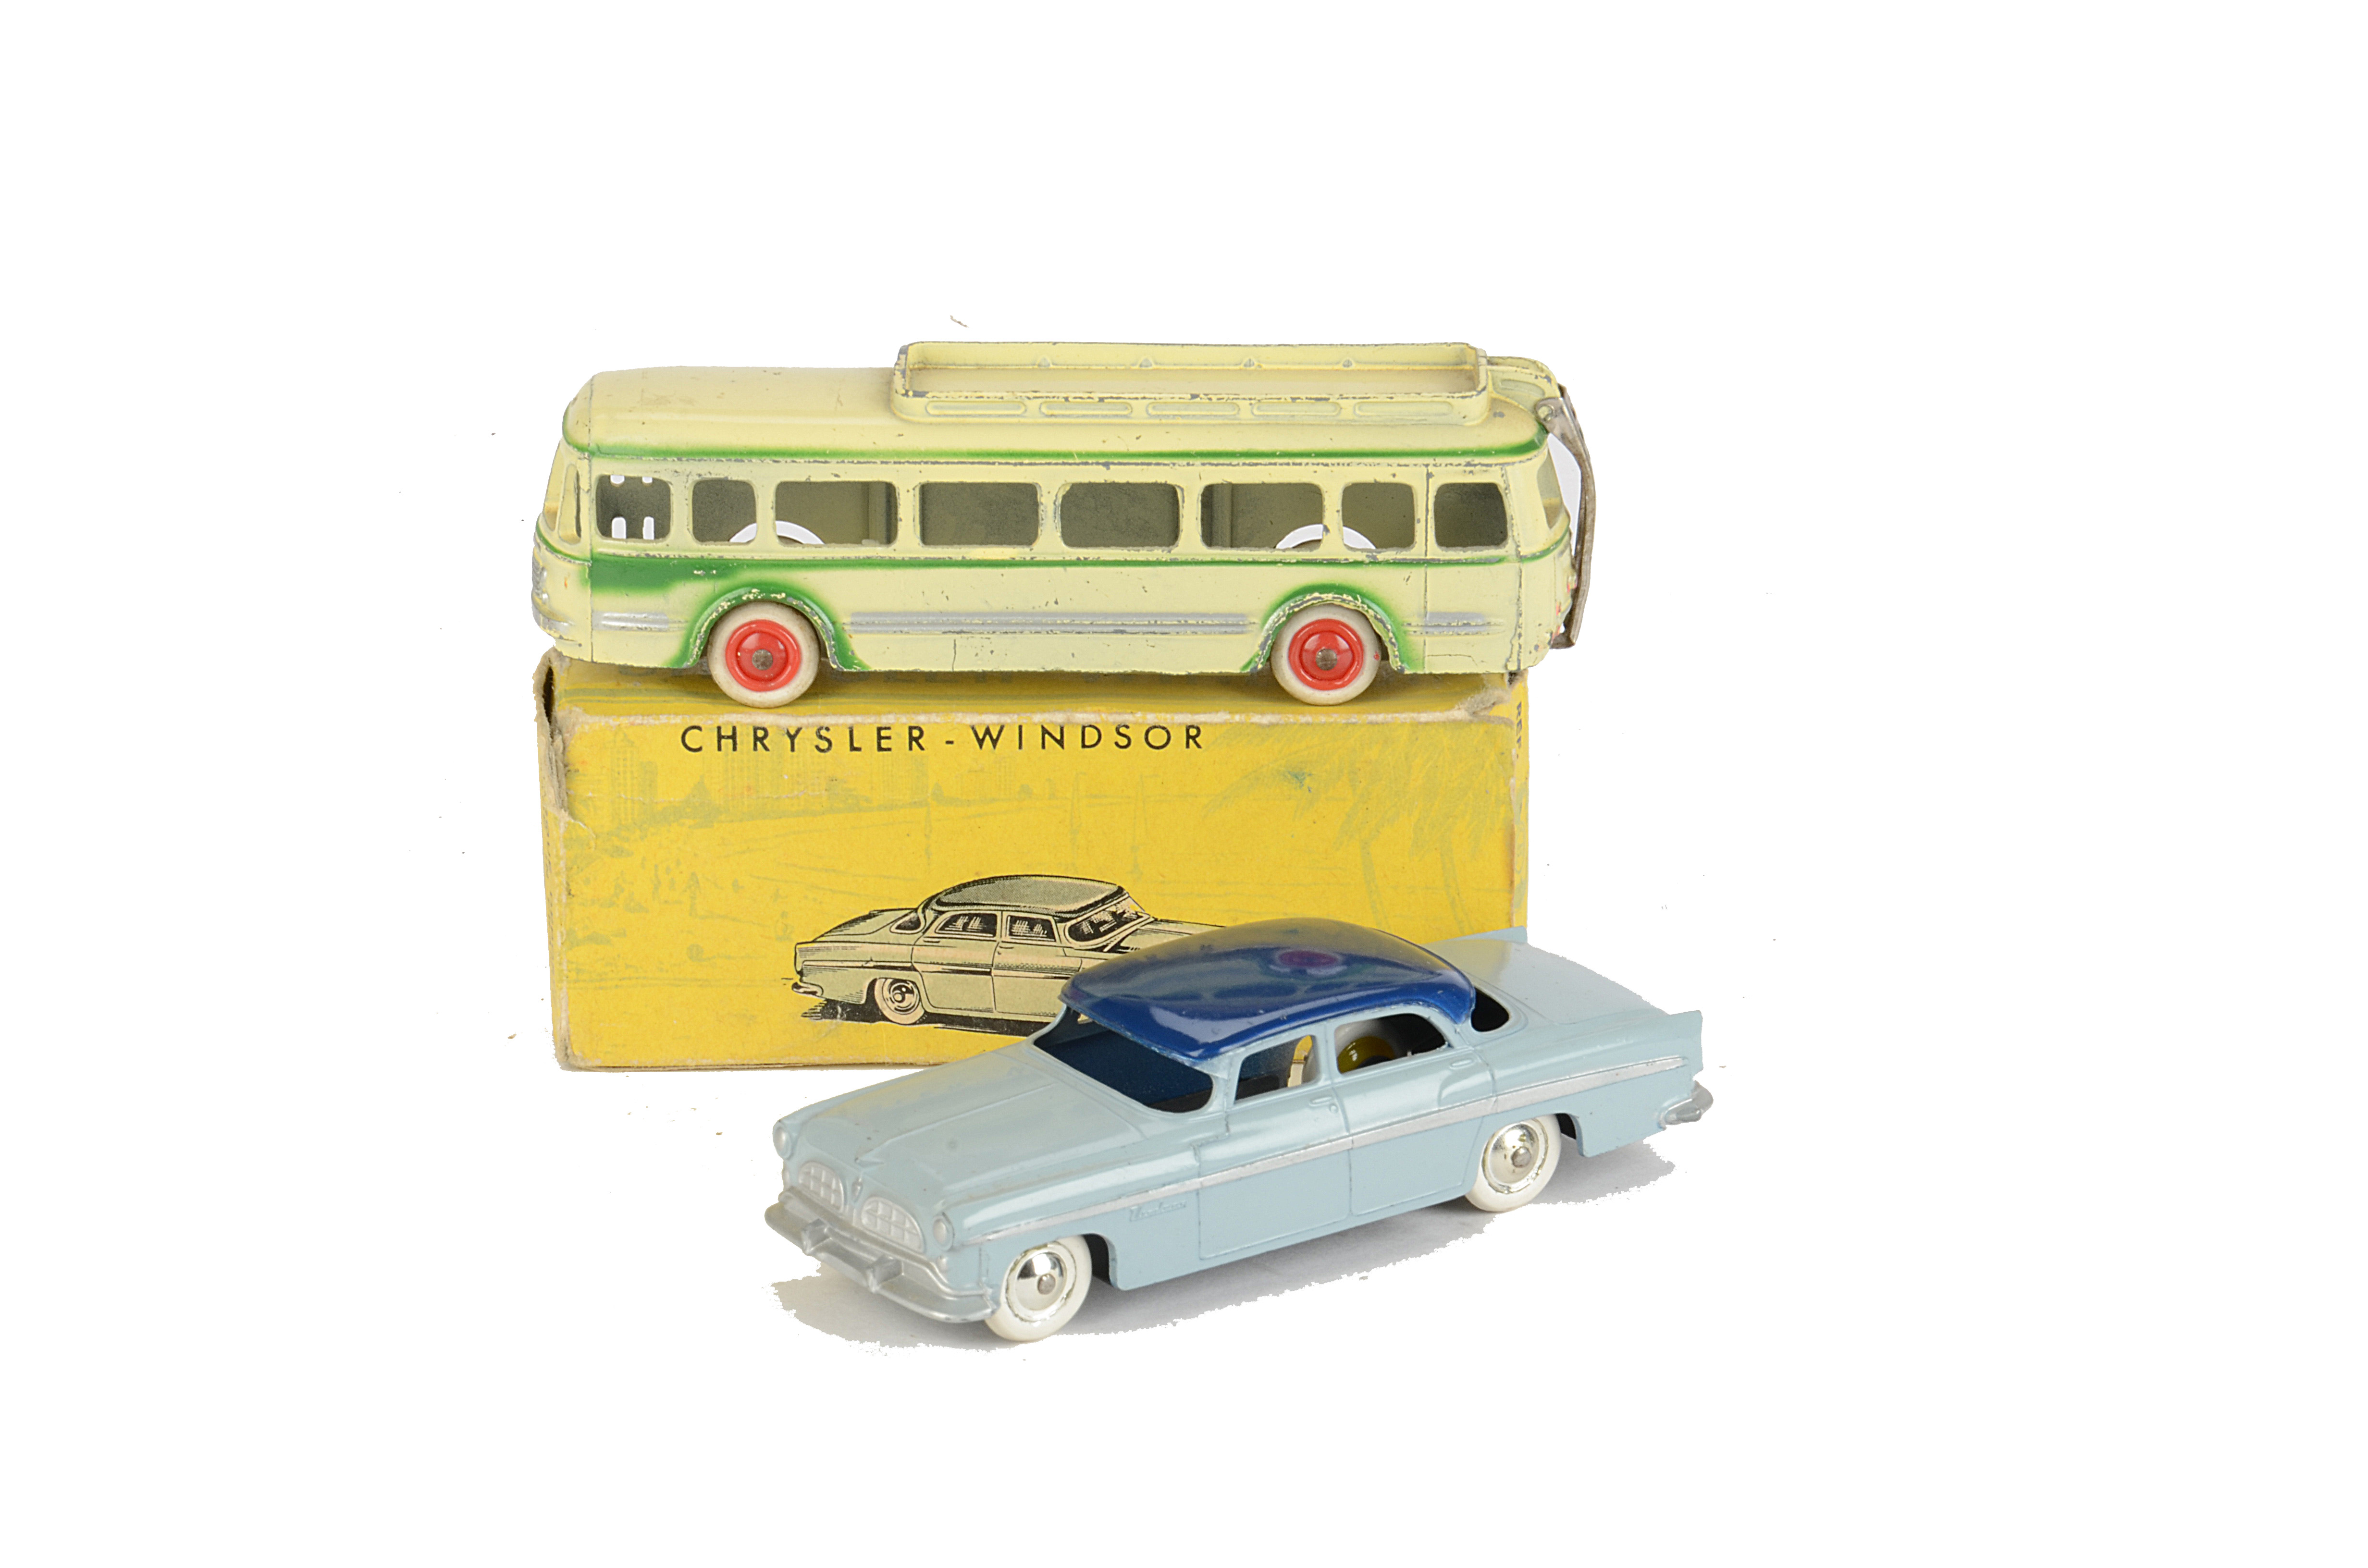 A CIJ No.3/15 Chrysler Windsor, pale blue body, dark blue roof, chrome plated plastic hubs, in